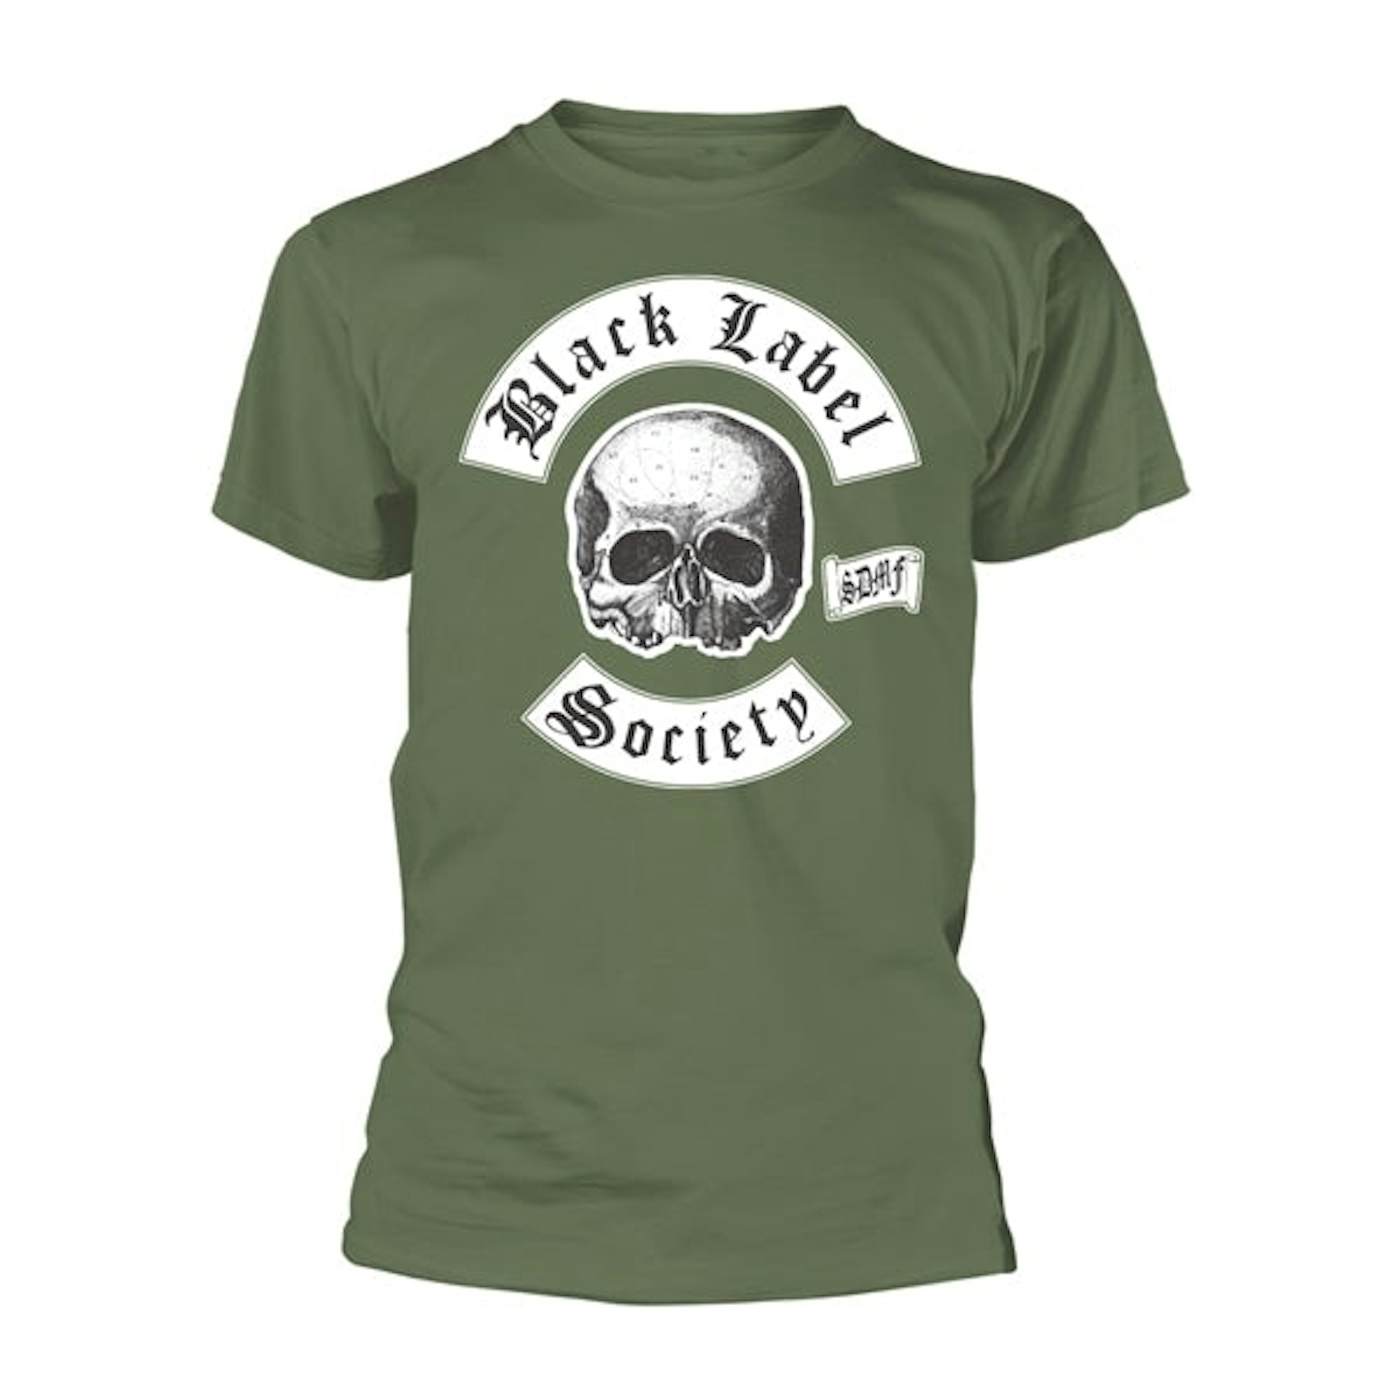 Black Label Society T-Shirt - The Almighty (Olive)